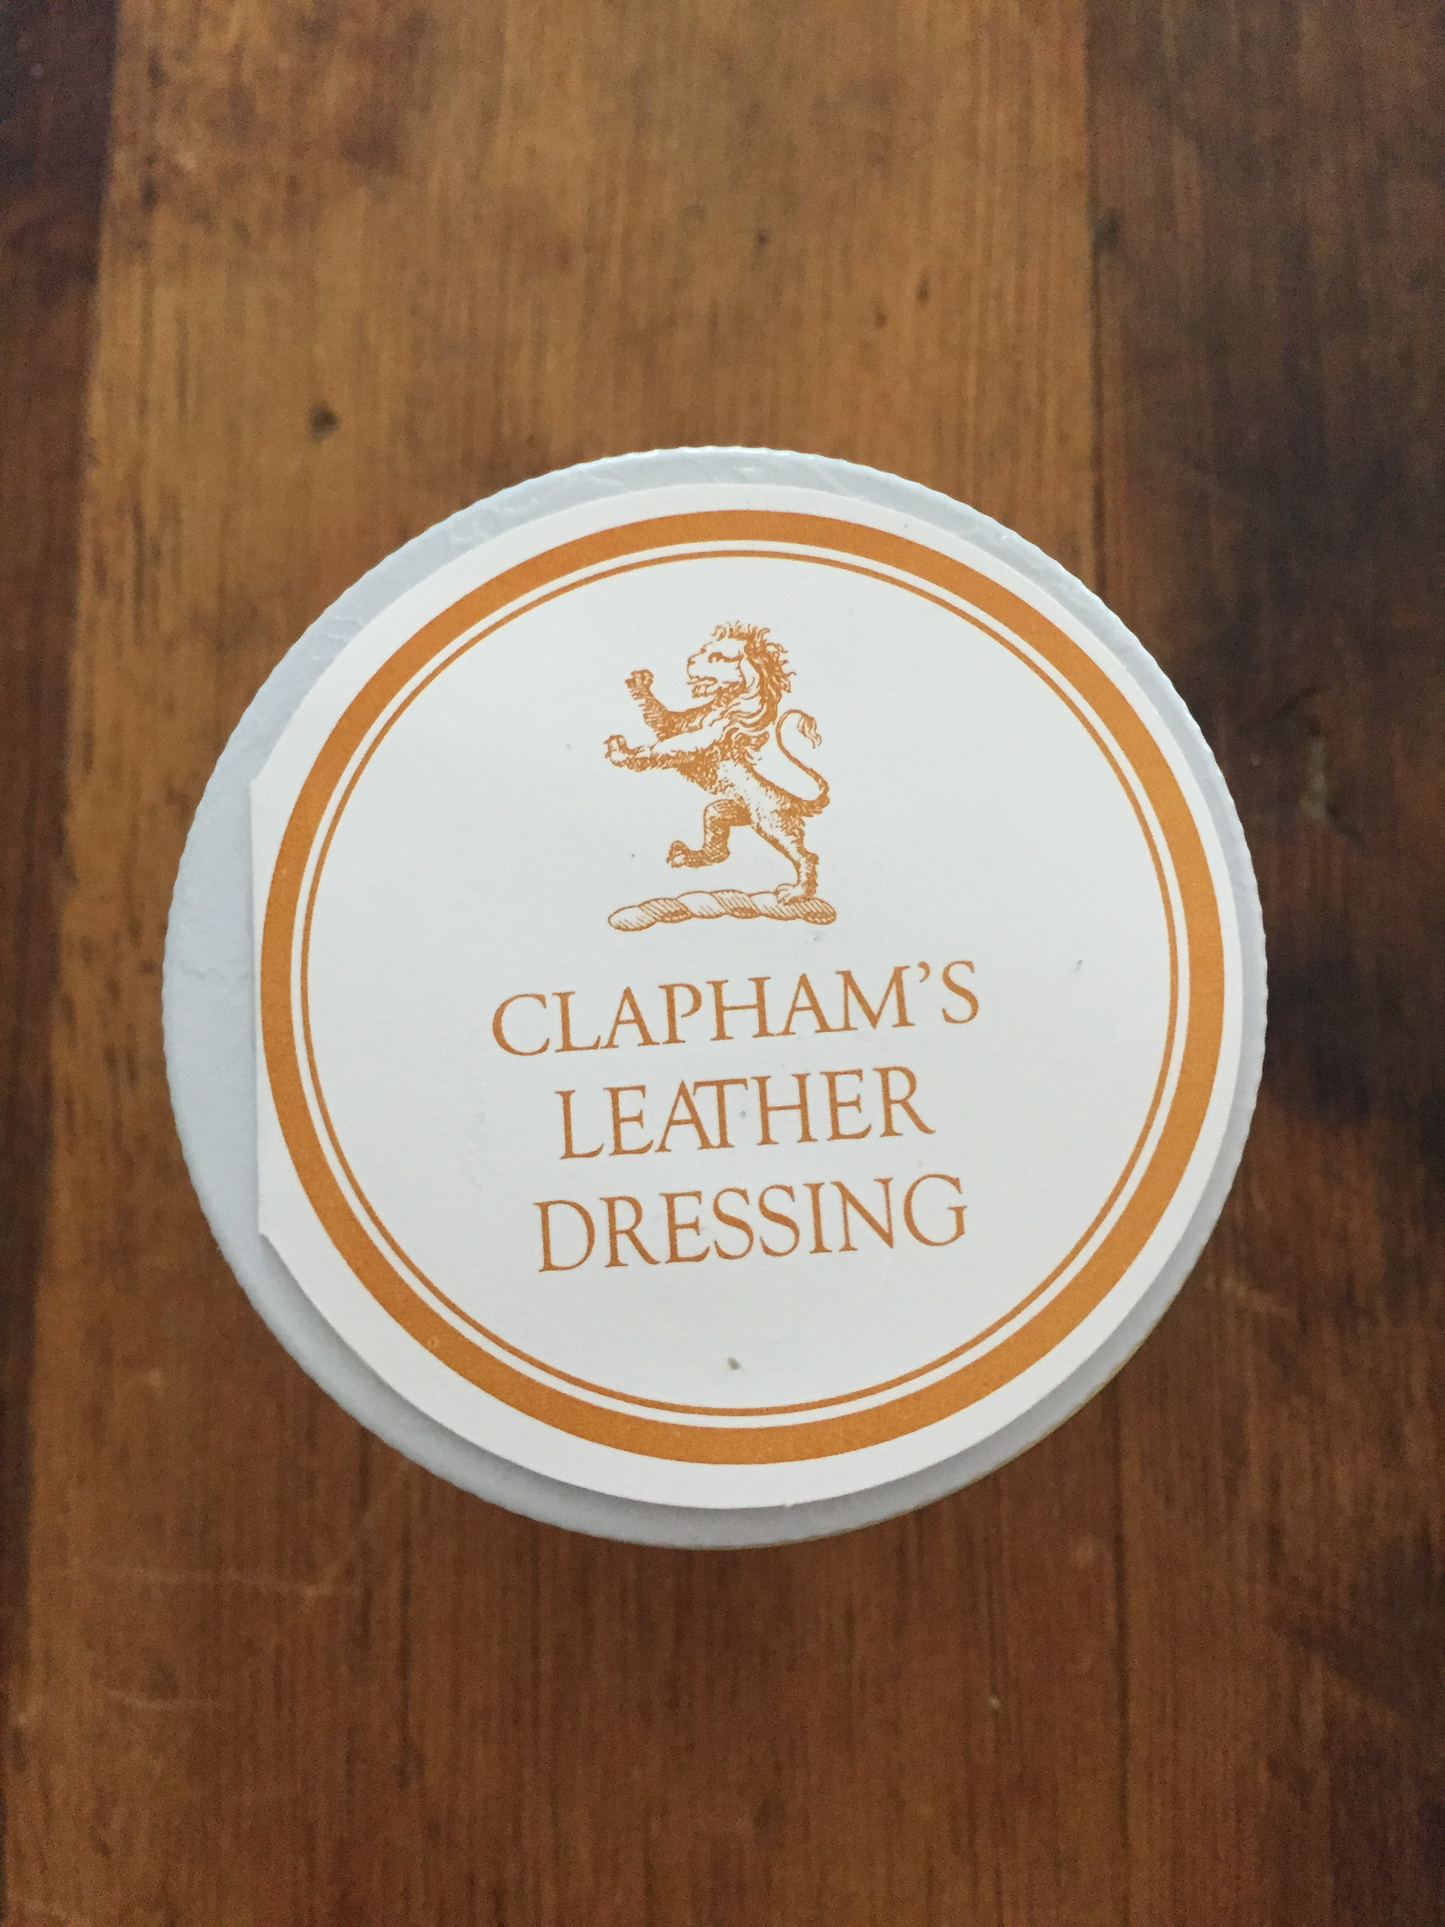 BEESWAX LEATHER DRESSING - EcoHome